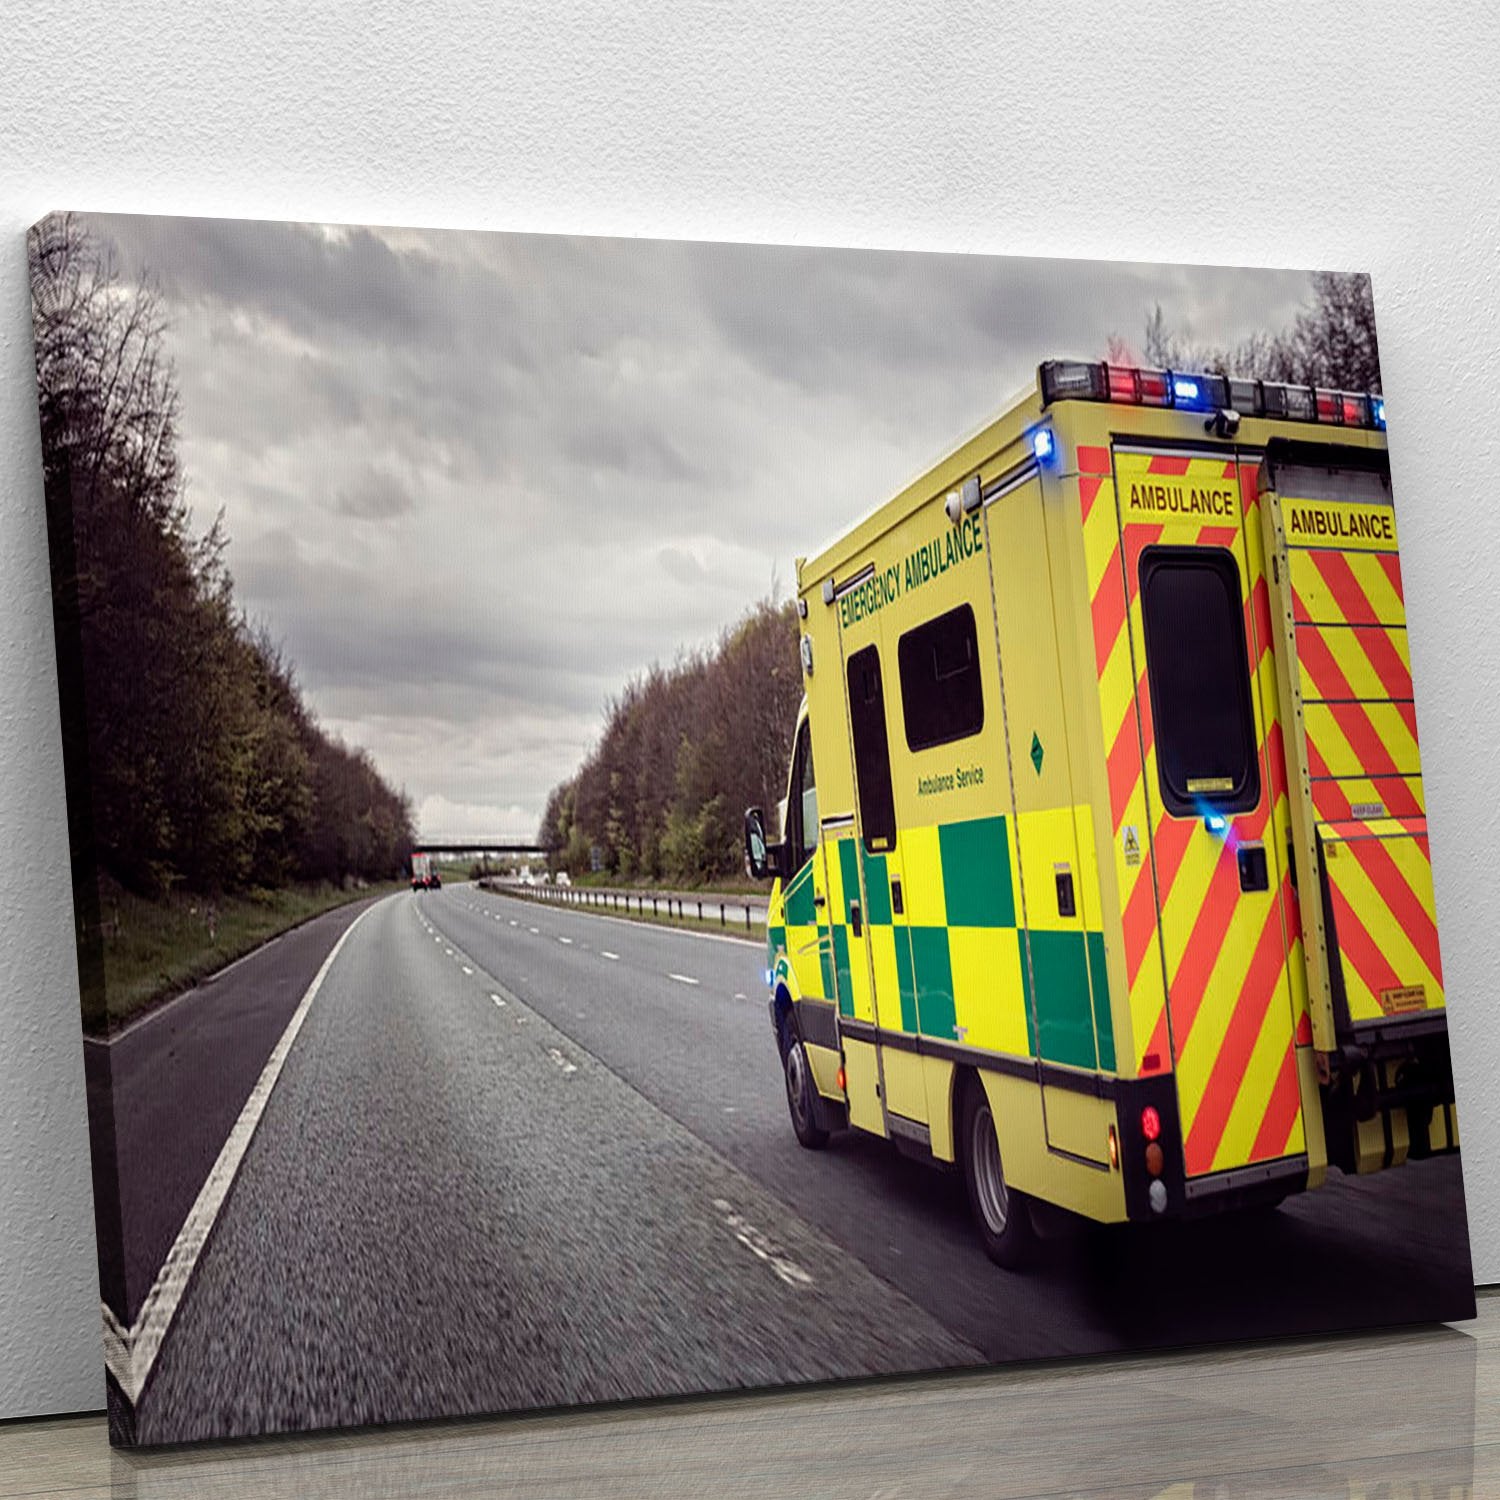 Ambulance responding to an emergency Canvas Print or Poster